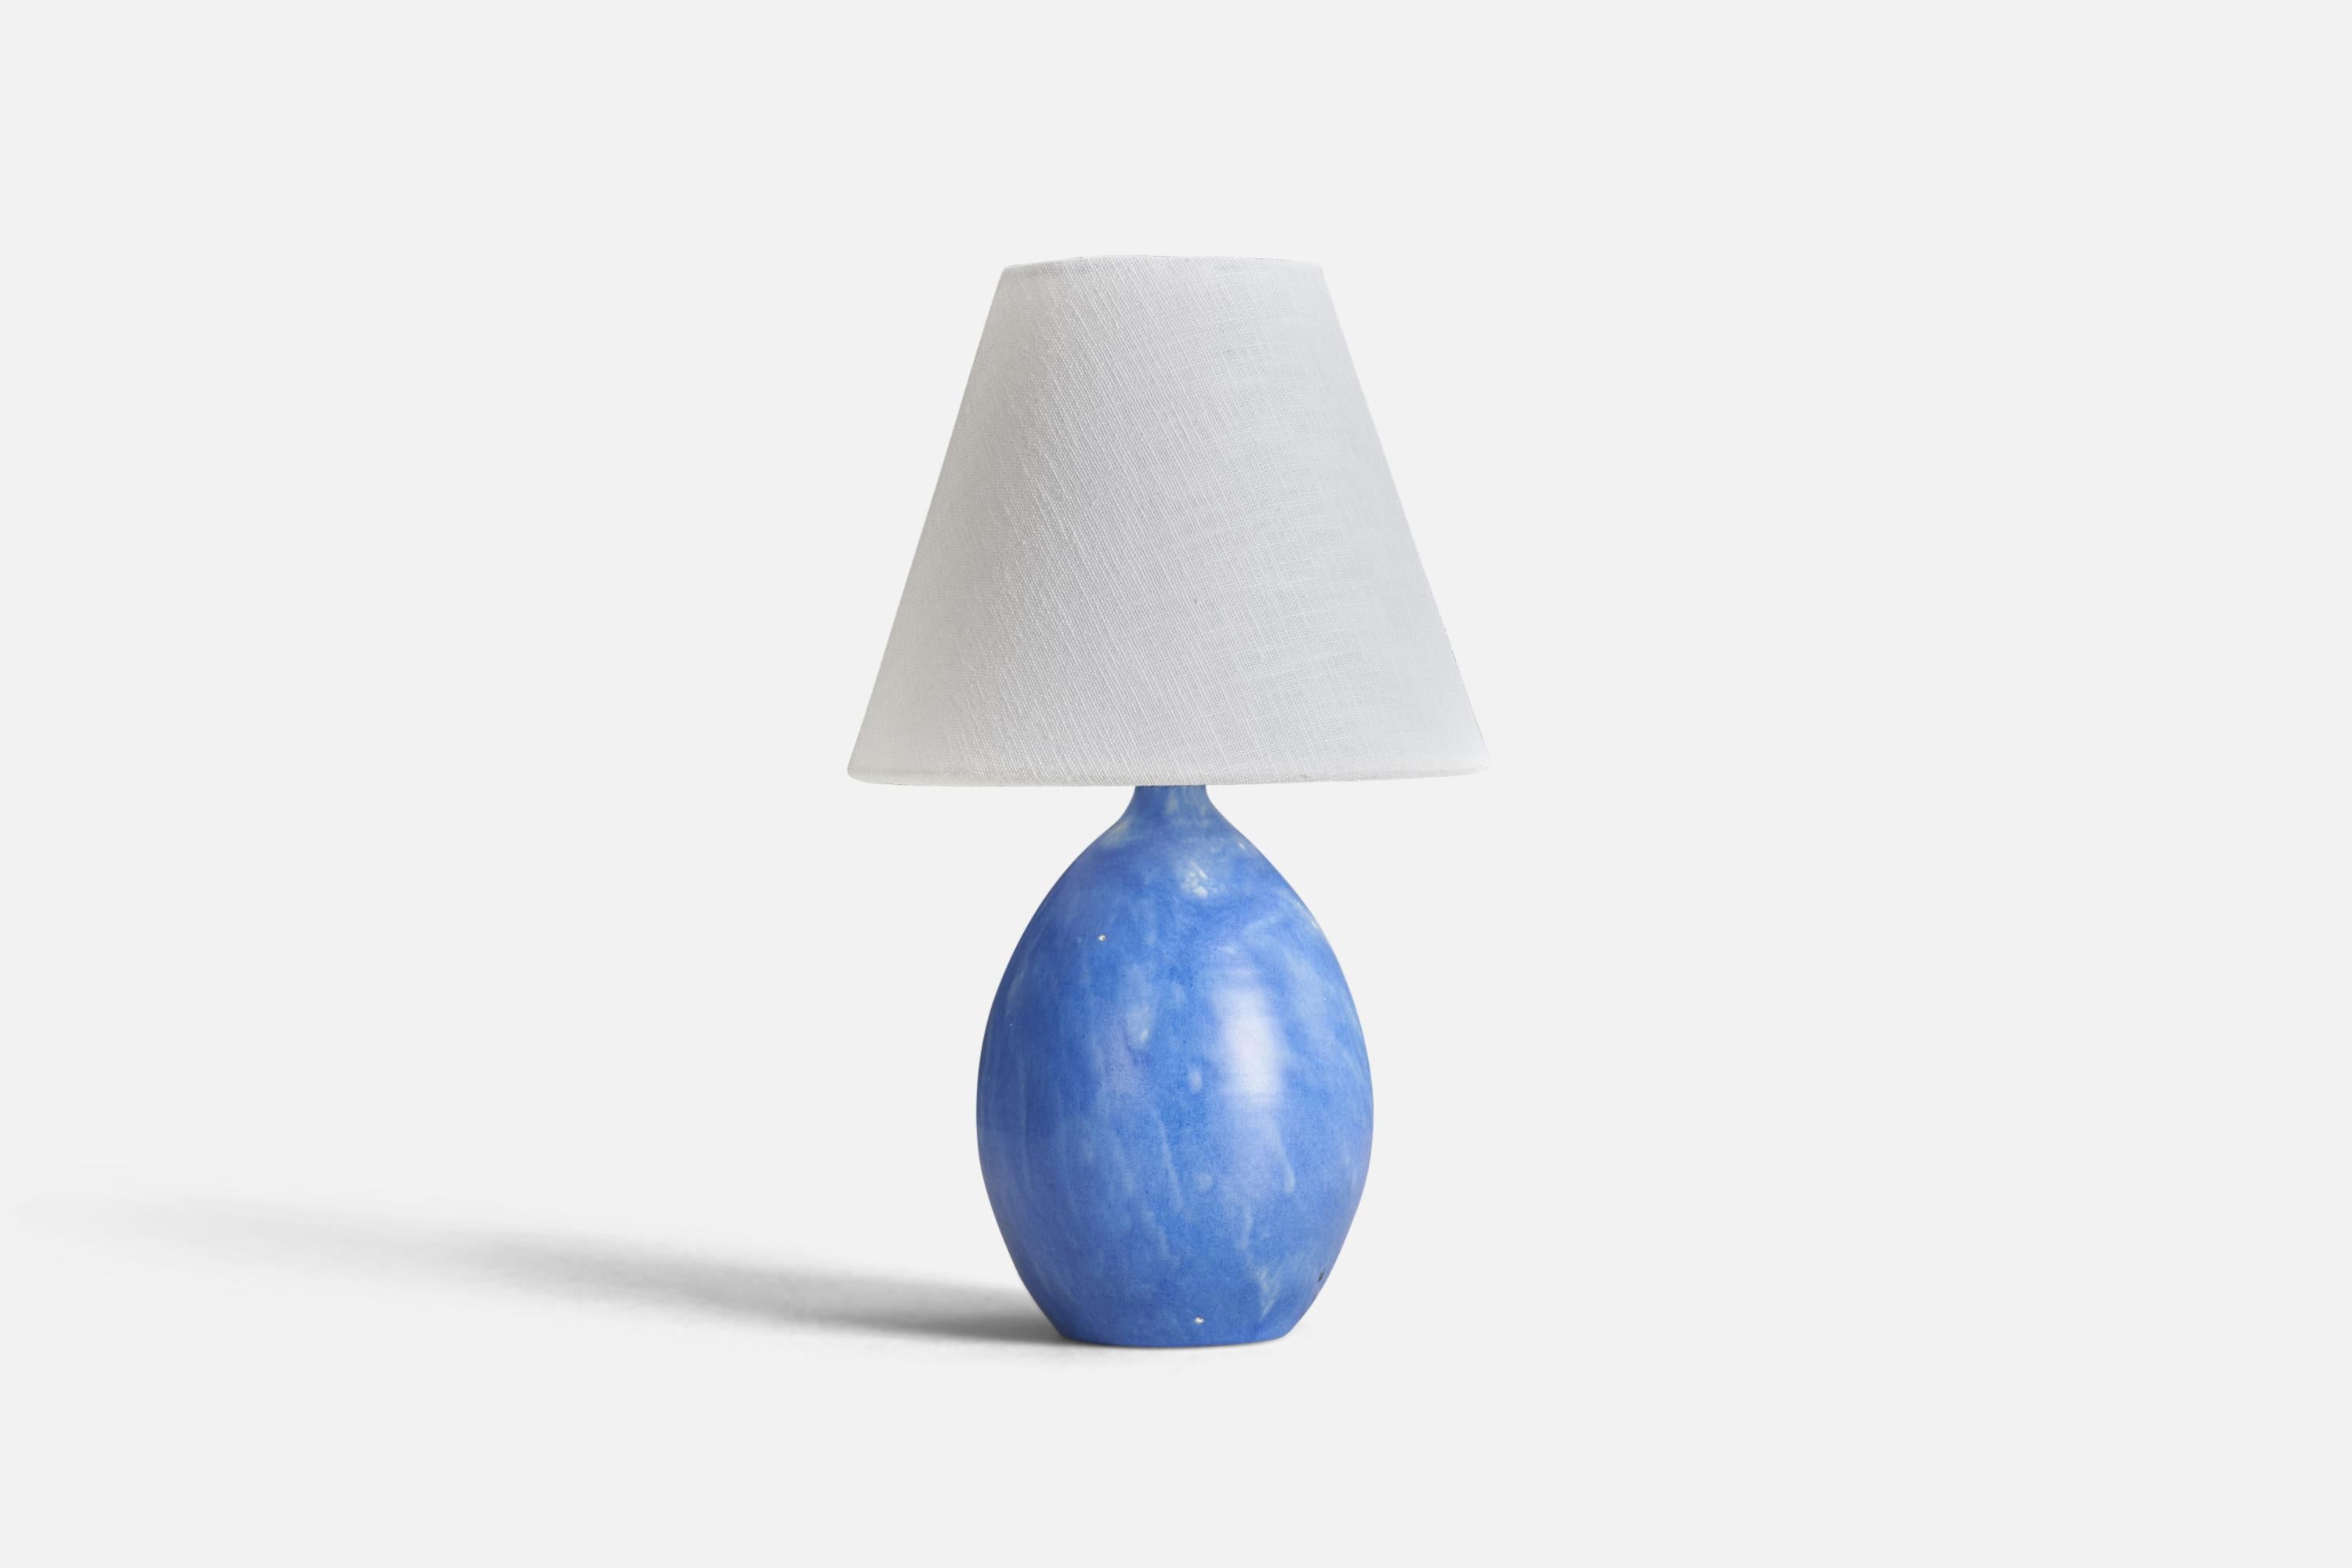 A stoneware table lamp designed by Martin Flodén and produced in Arvika, Sweden, 1970s.

Dimensions of lamp (inches) : 9.5 x 5 x 5 (Height x Width x Depth)
Dimensions of lampshade (inches) : 4 x 8 x 6.5 (Top Diameter x Bottom Diameter x